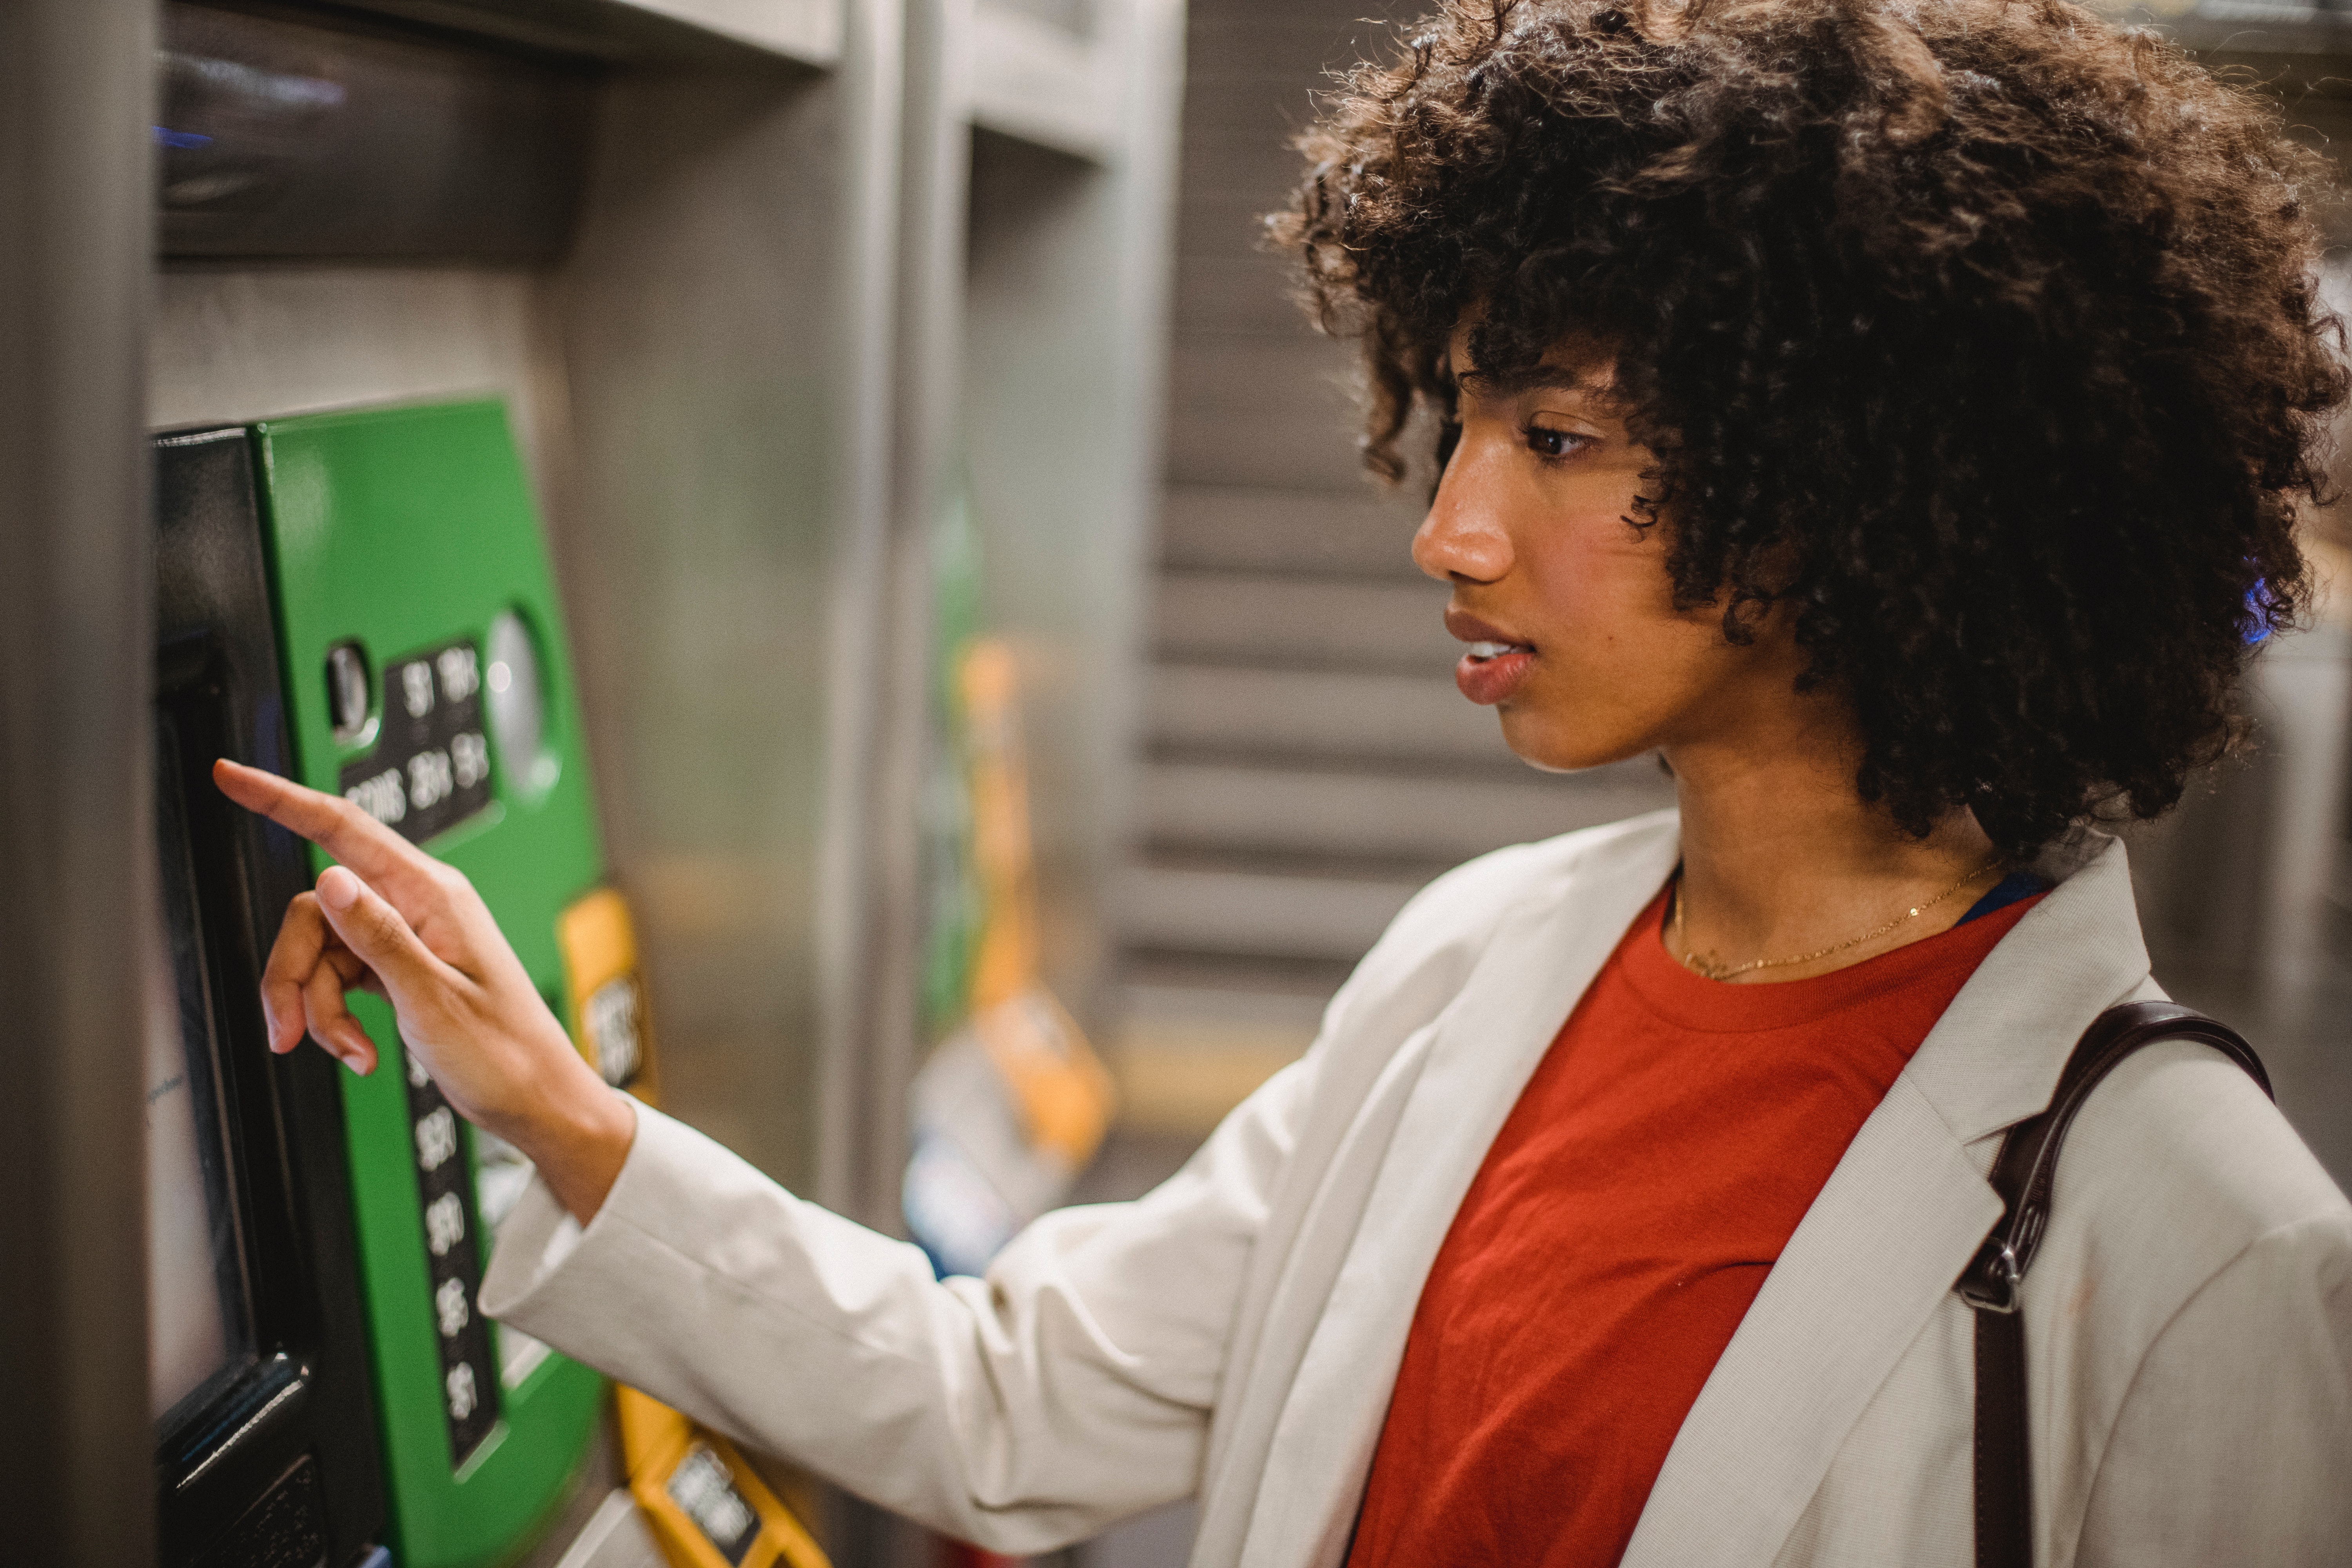 Photo by Roberto Hund: https://www.pexels.com/photo/photograph-of-a-woman-with-curly-hair-using-a-machine-5357178/